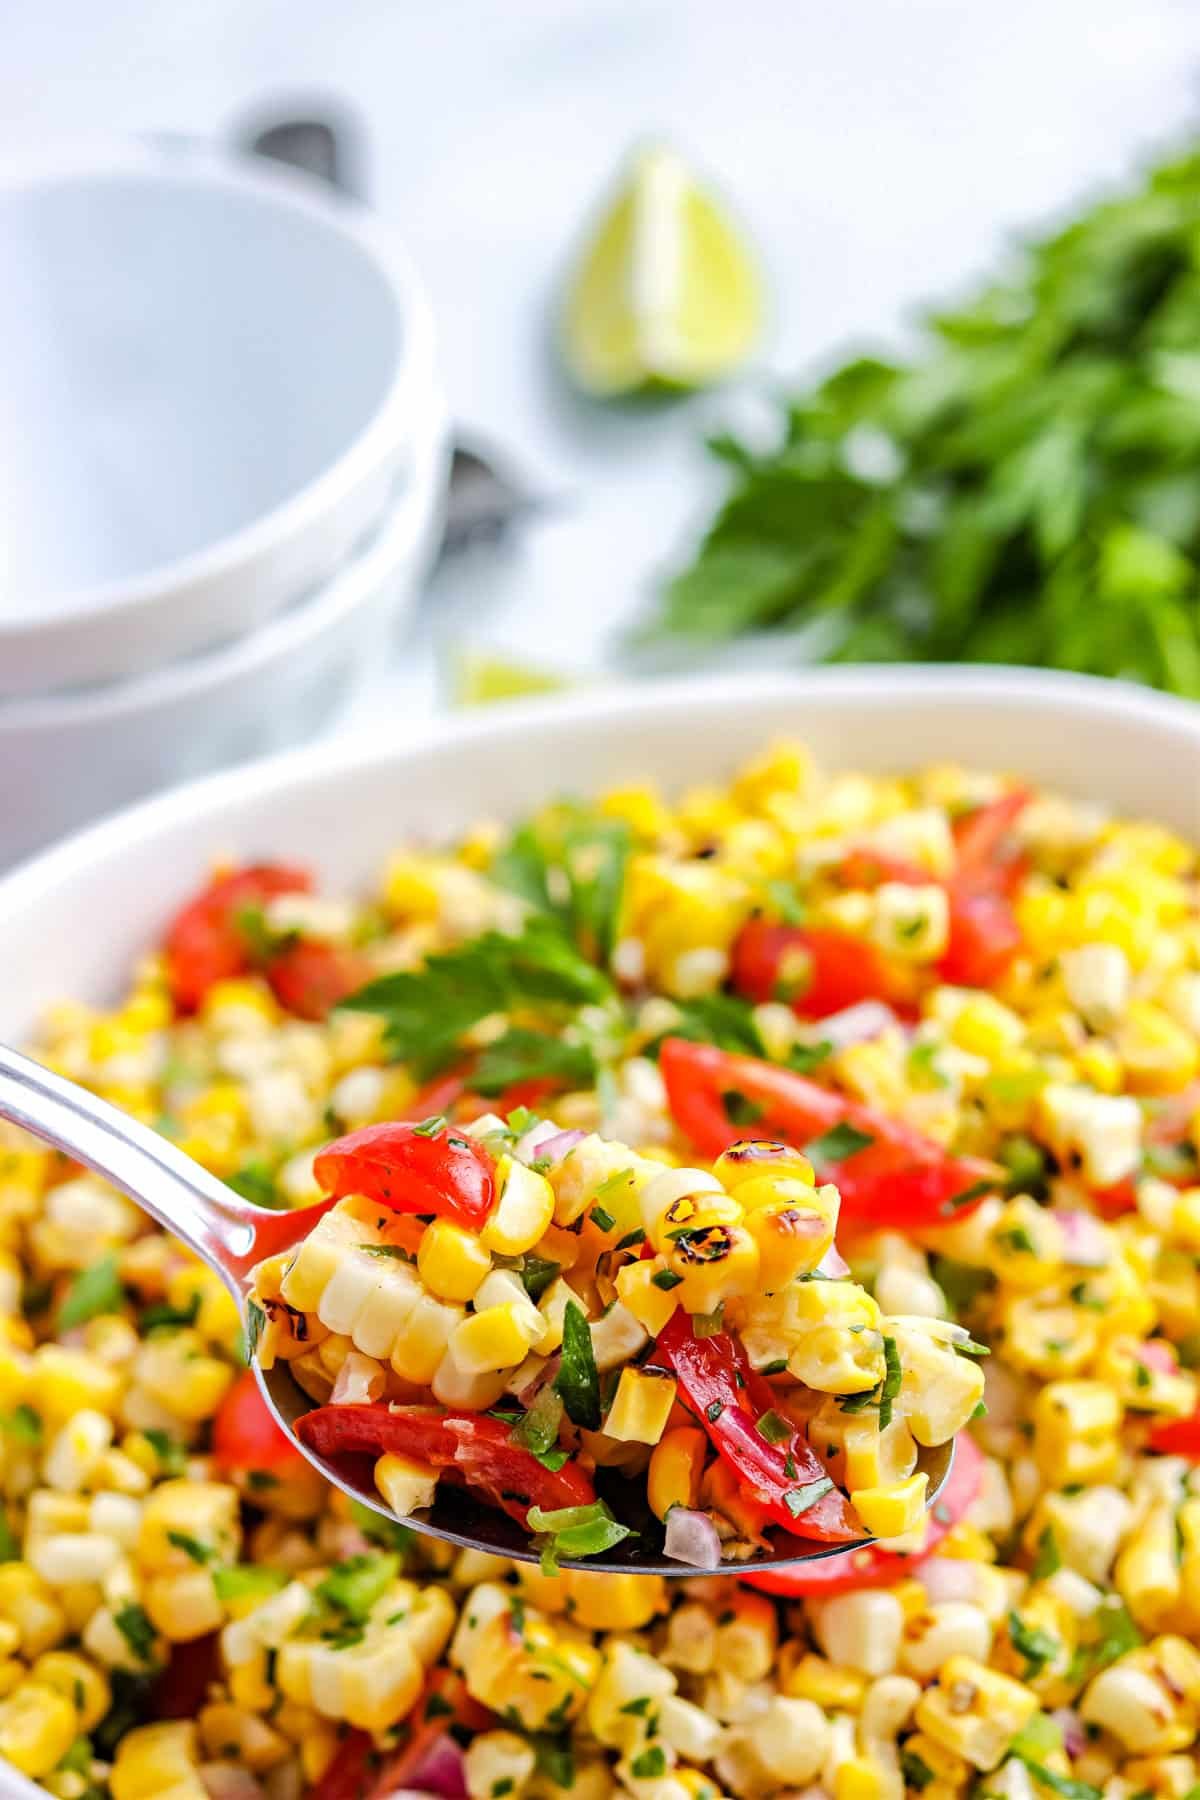 A spoon scooping up some of the corn salad that's been grilled.